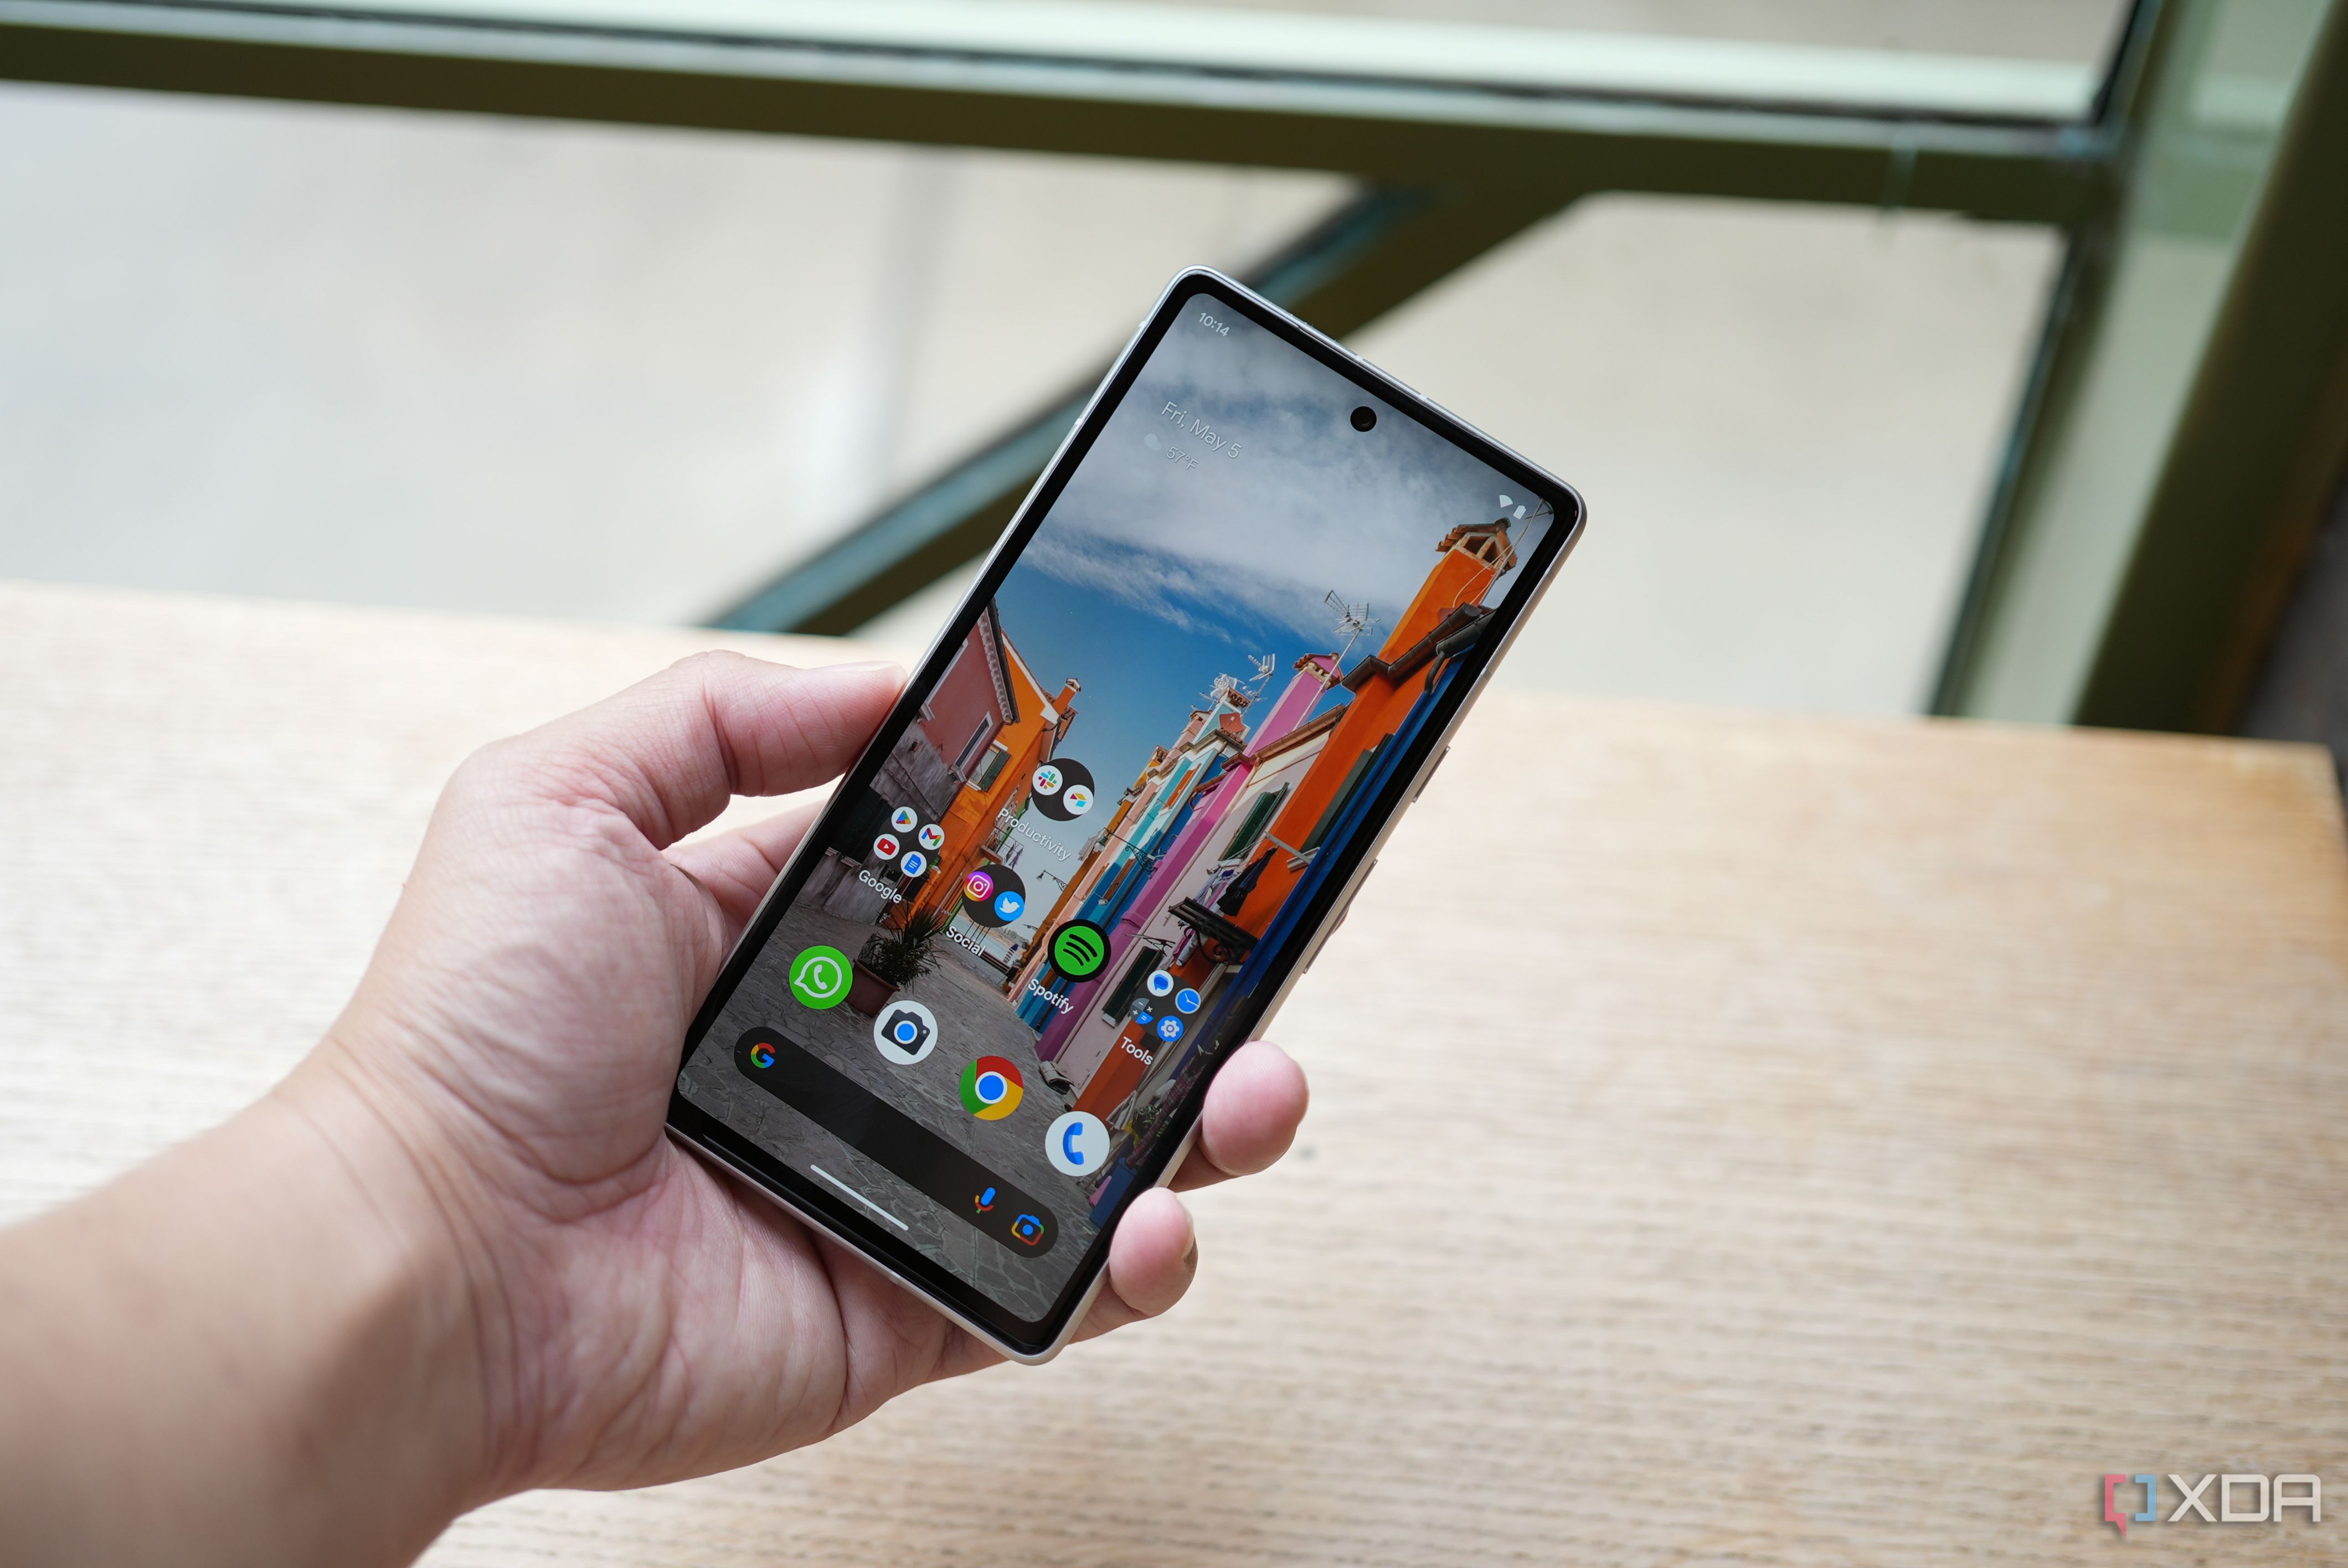 Android 14 Beta 5.1 brings connectivity improvements and other bug fixes to Pixel devices